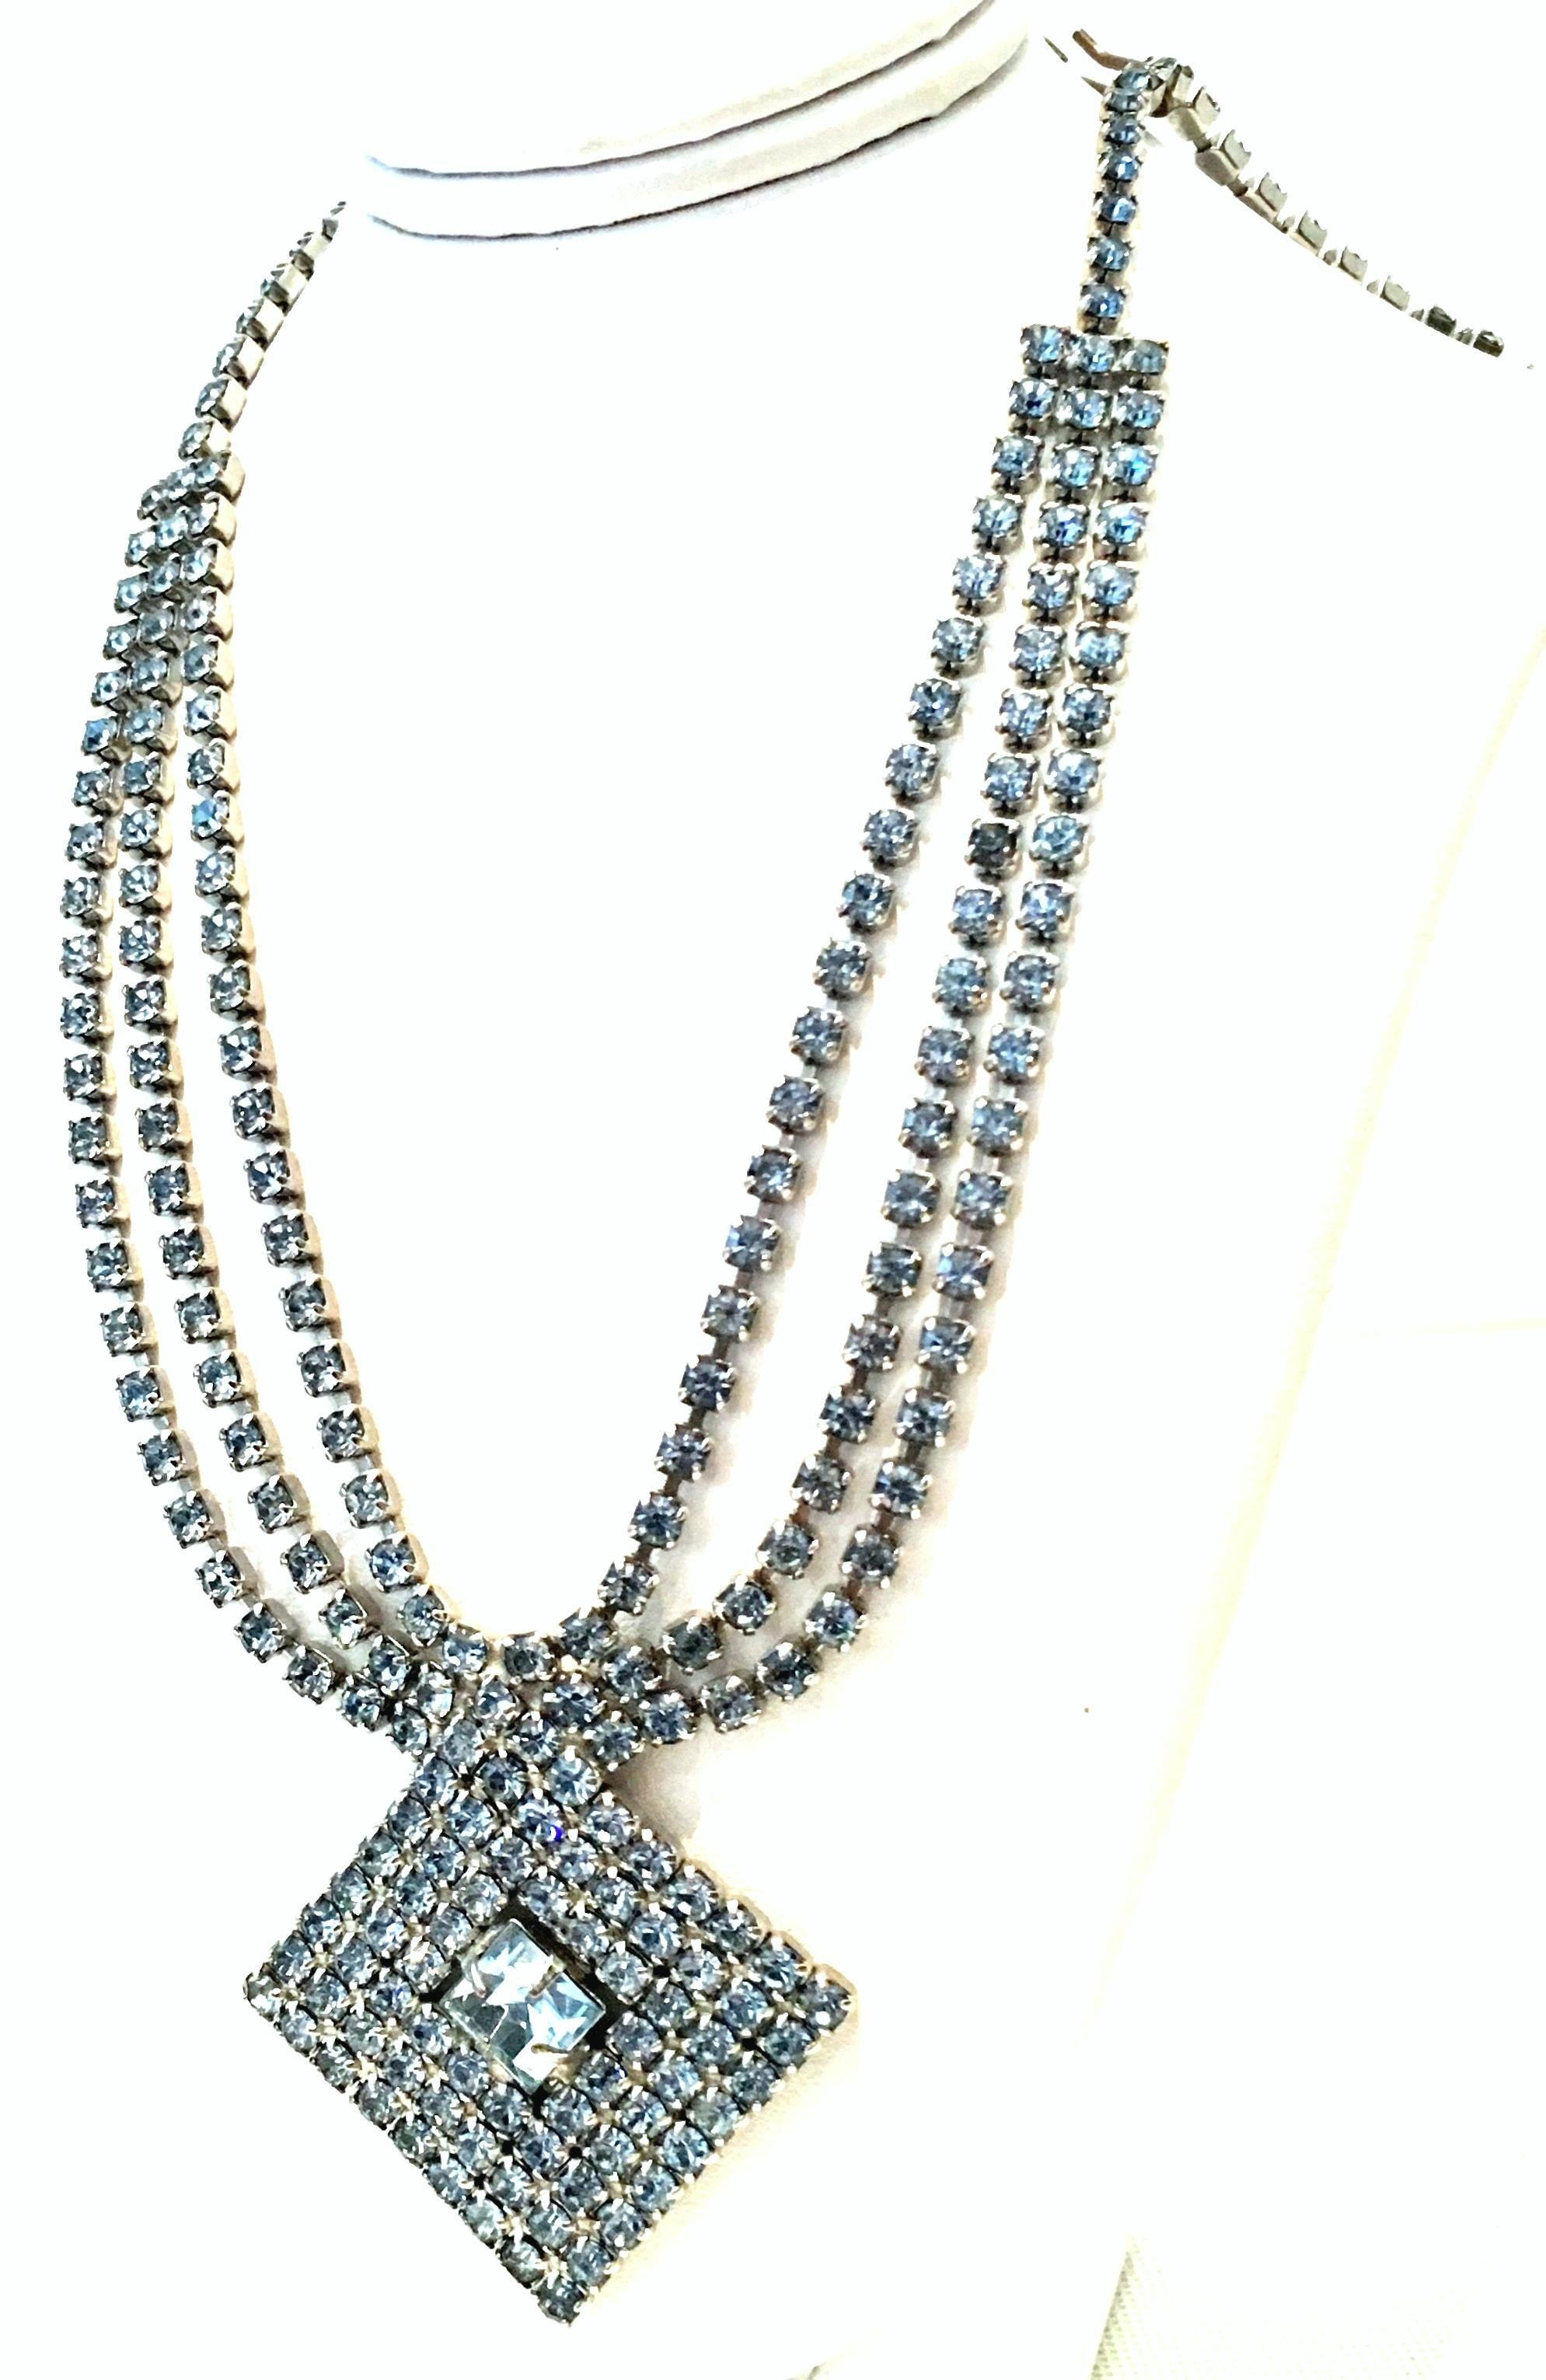 20th Century Monumental Art Deco Style Silver & Blue Sapphire Triple Row Pendant Choker Style Necklace. Features three rows of brilliant prong set blue sapphire cut and faceted stones set in silver rhodium plate with a 2